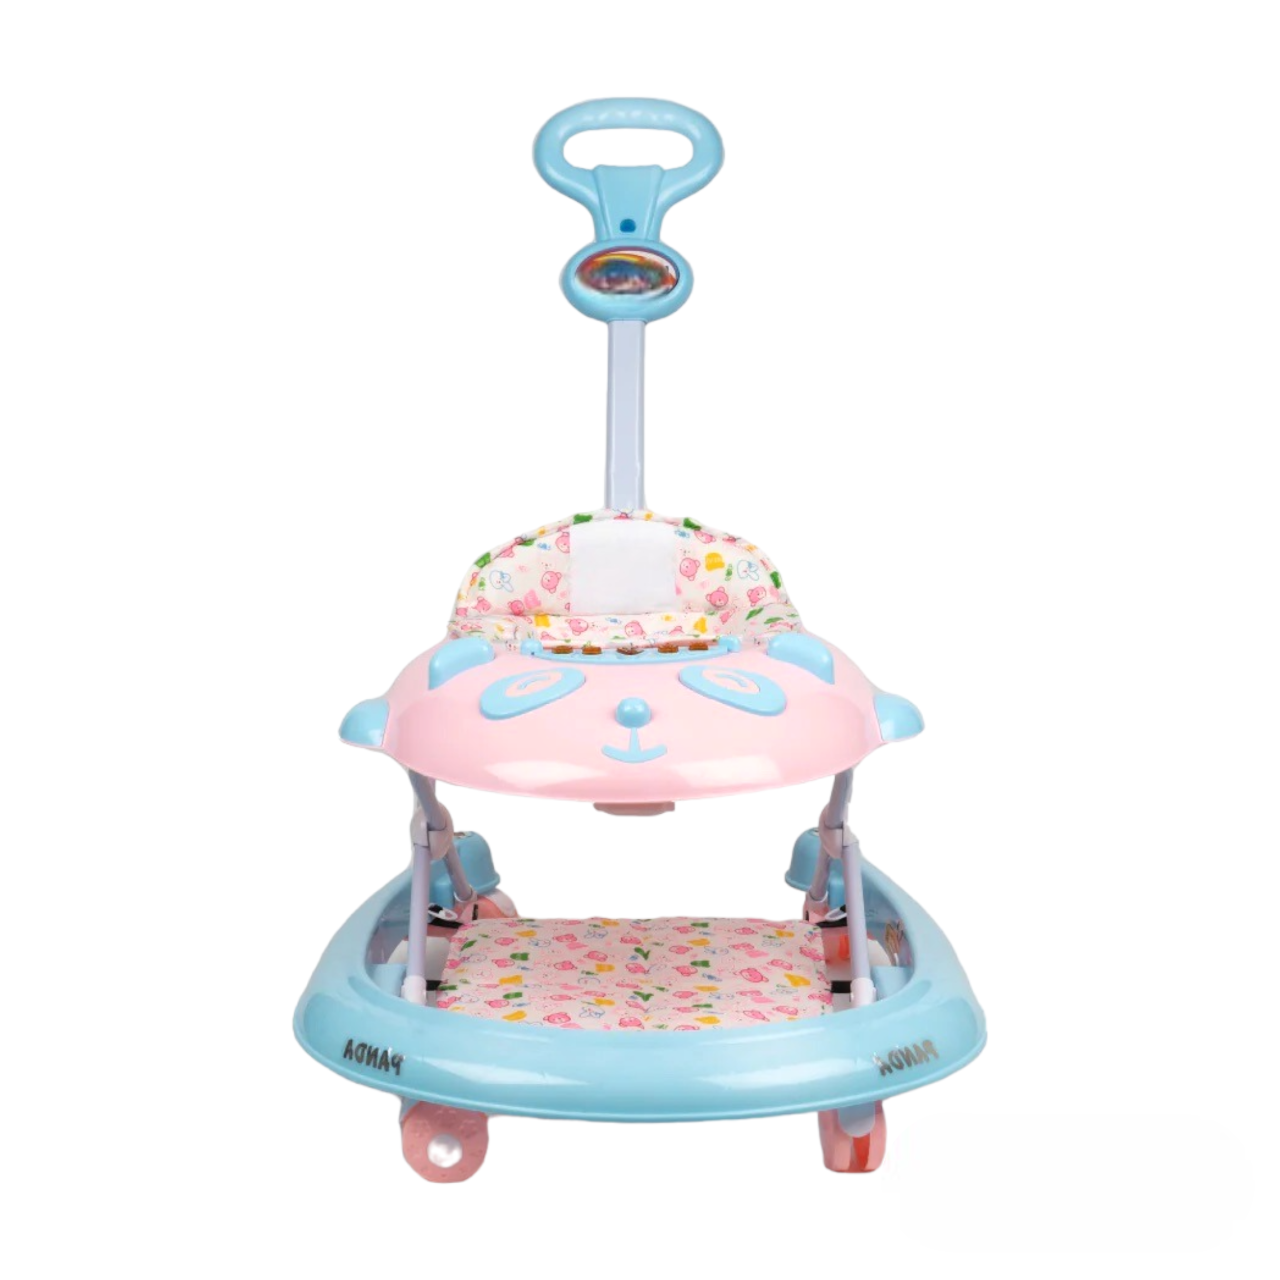 Panda Bravo Baby Walker for Kids (06-15) Months Comes With Legs Rest & Music-Ice Blue